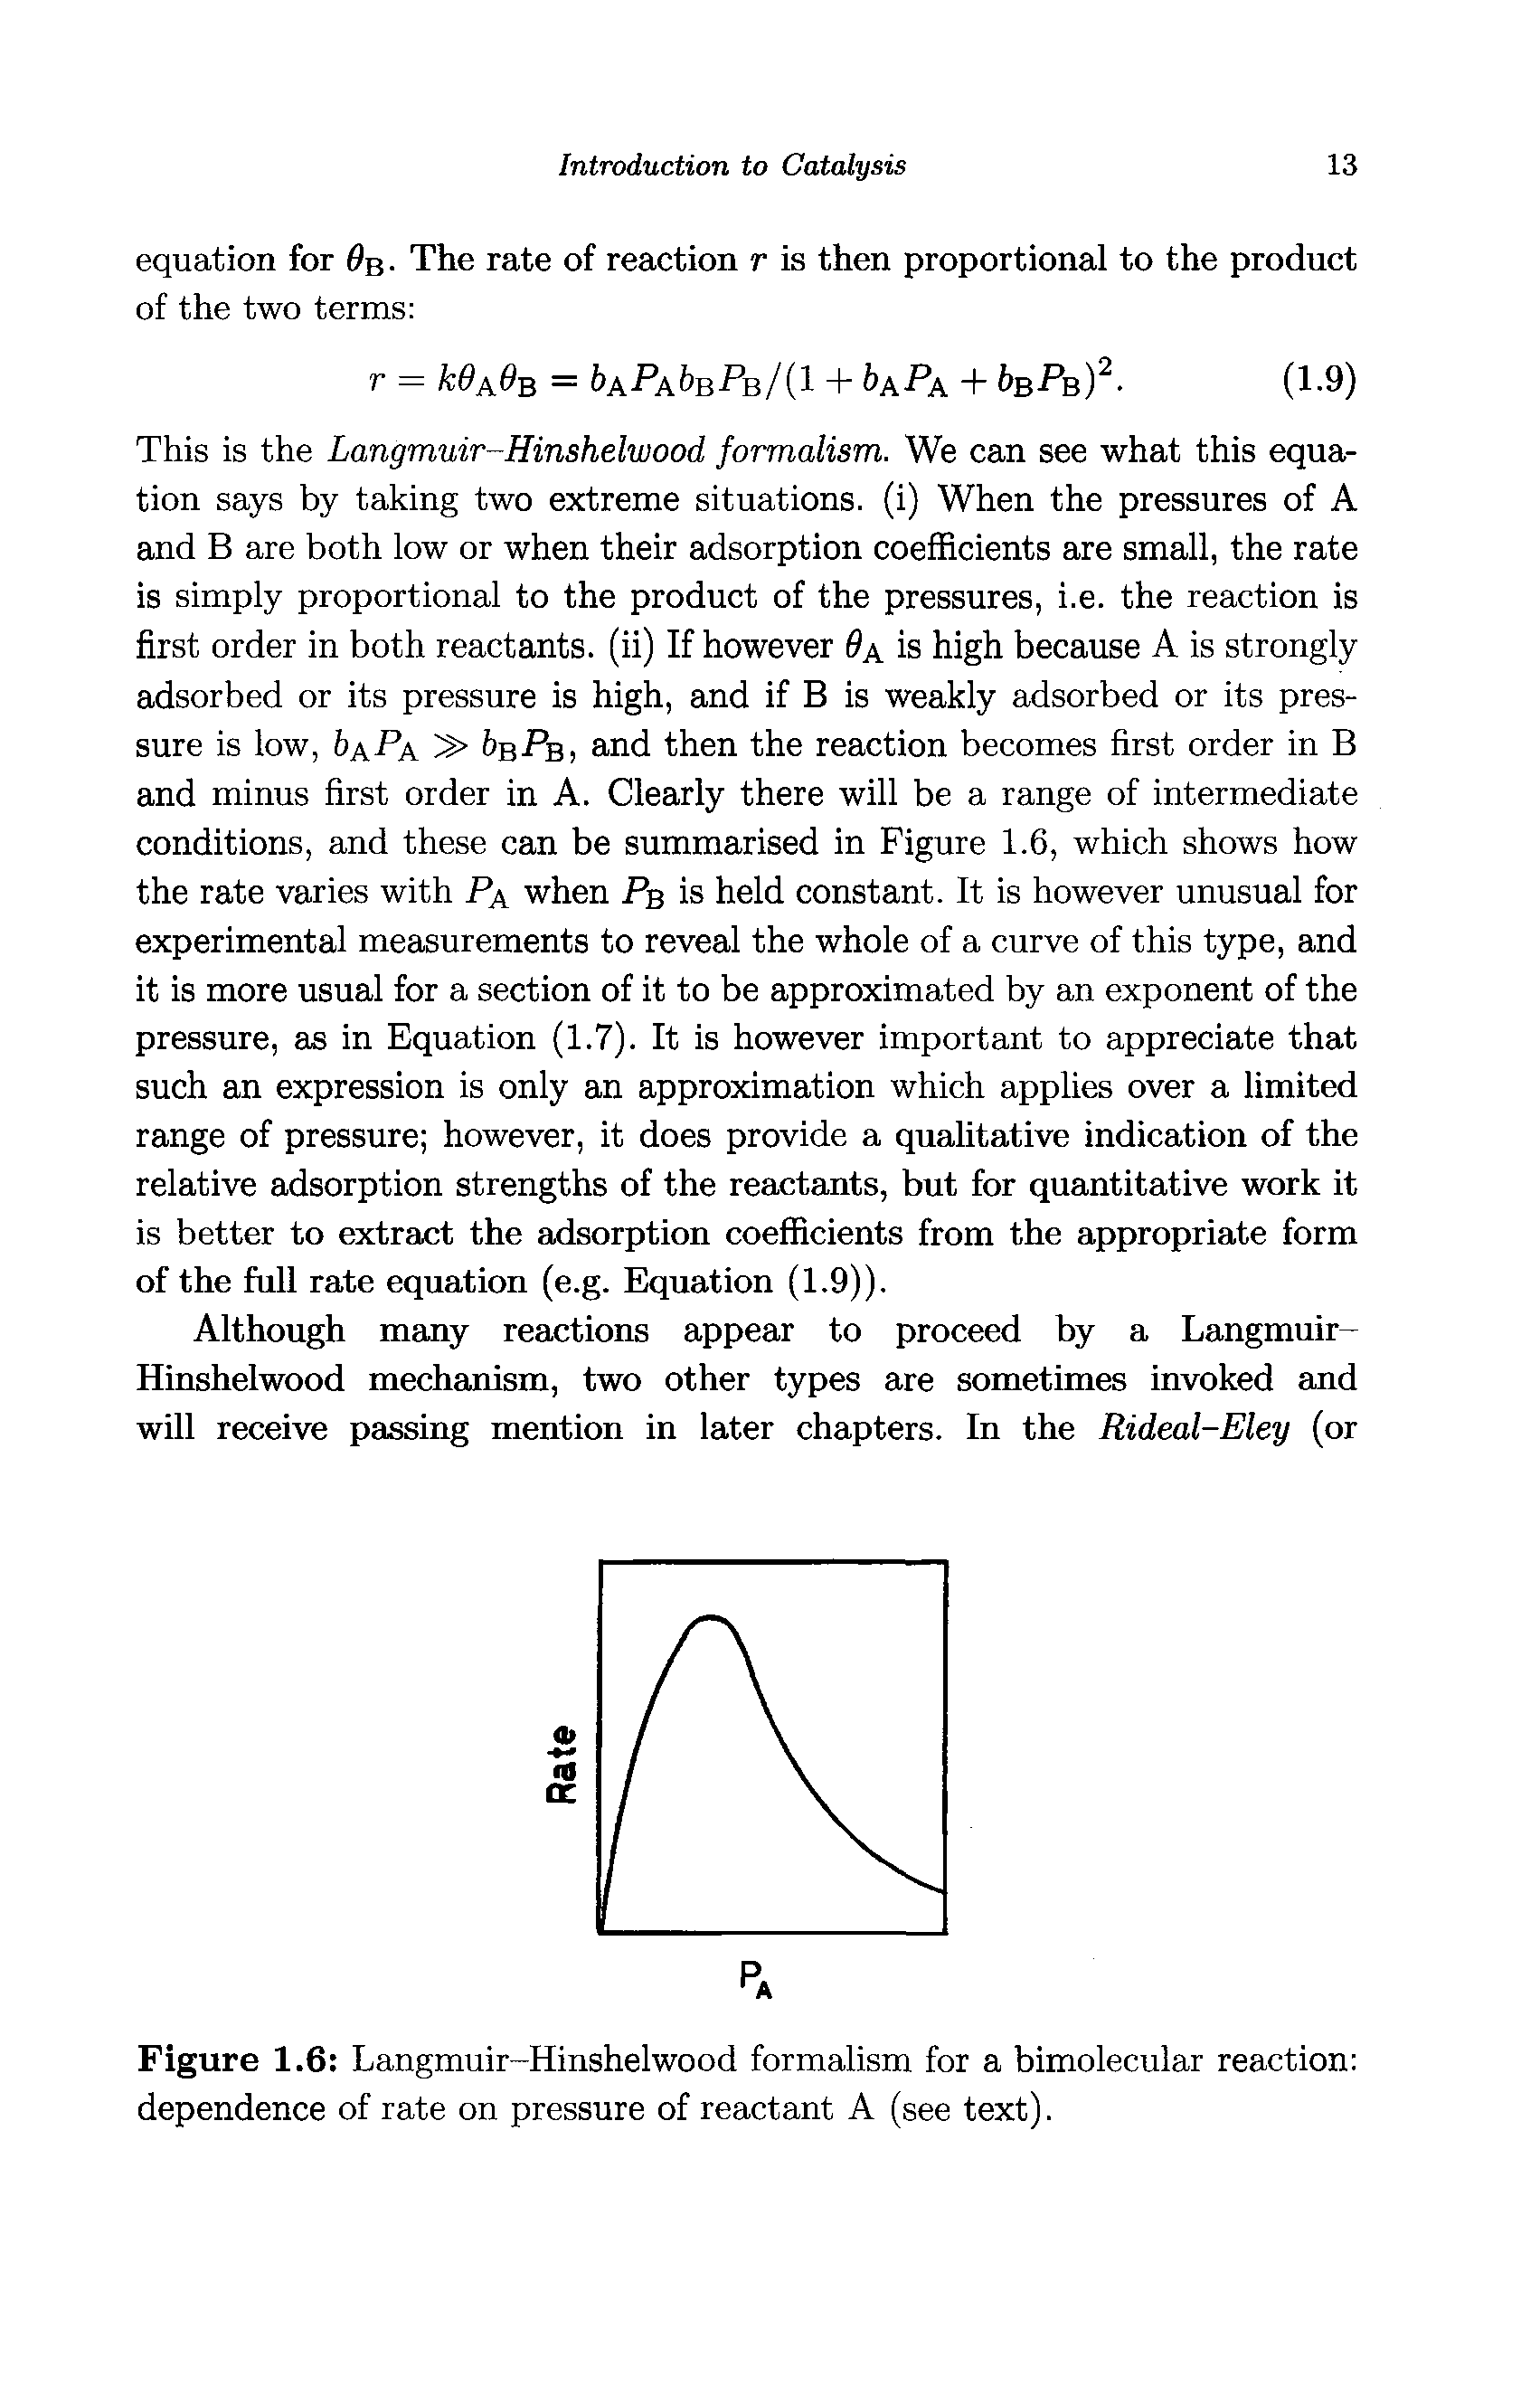 Figure 1.6 Langmuir-Hinshelwood formalism for a bimolecular reaction dependence of rate on pressure of reactant A (see text).